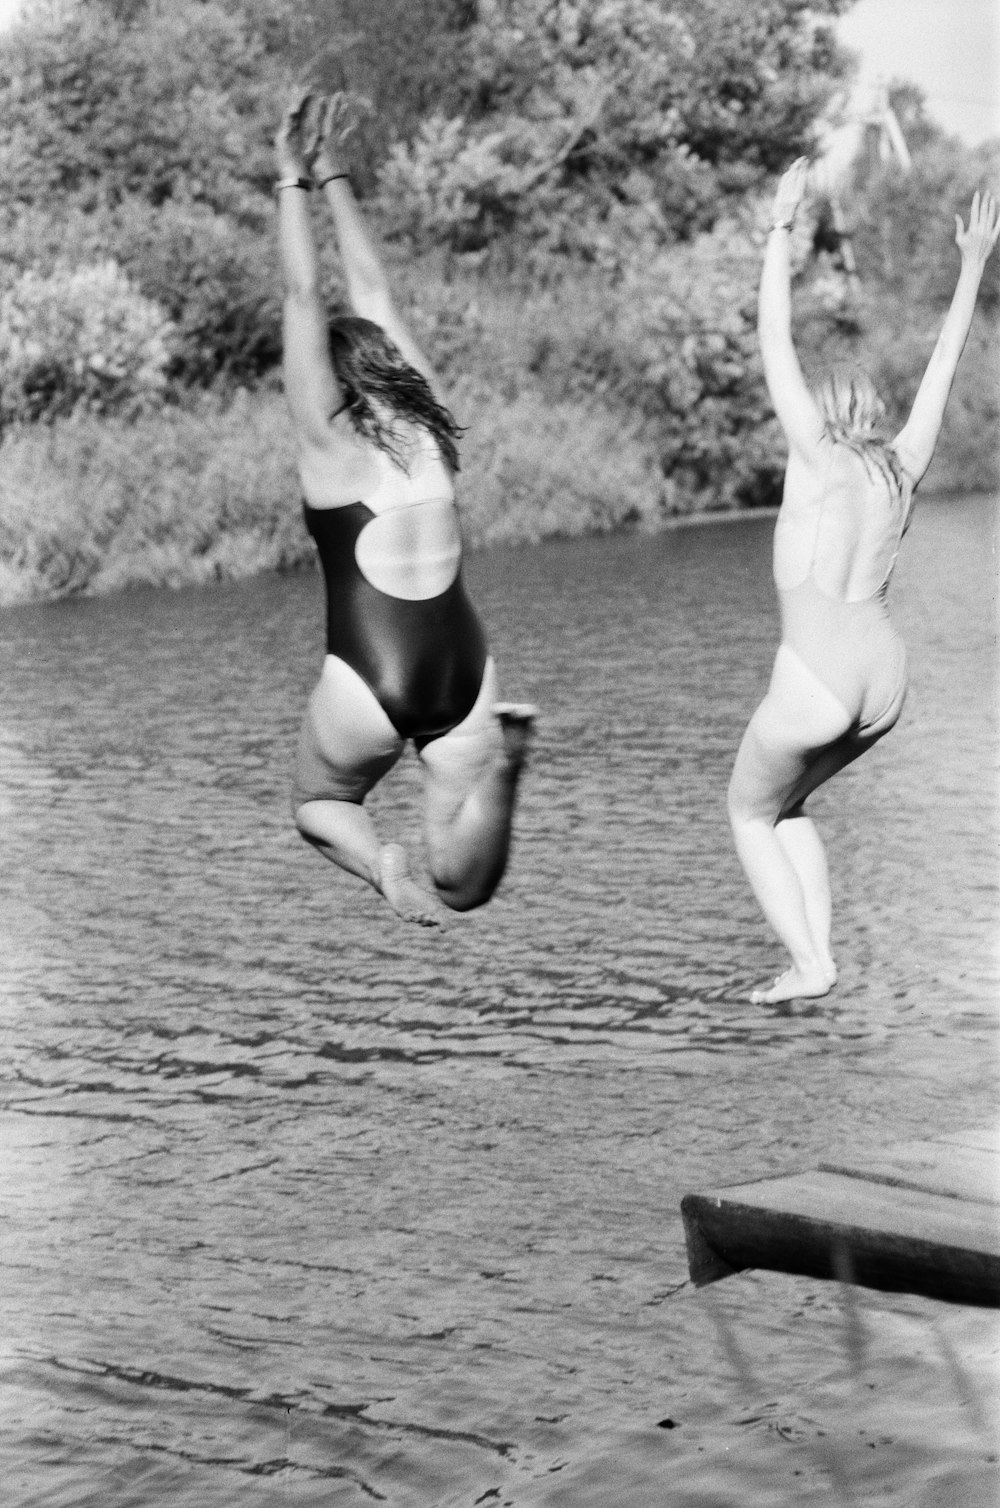 two women jumping off a dock into a body of water